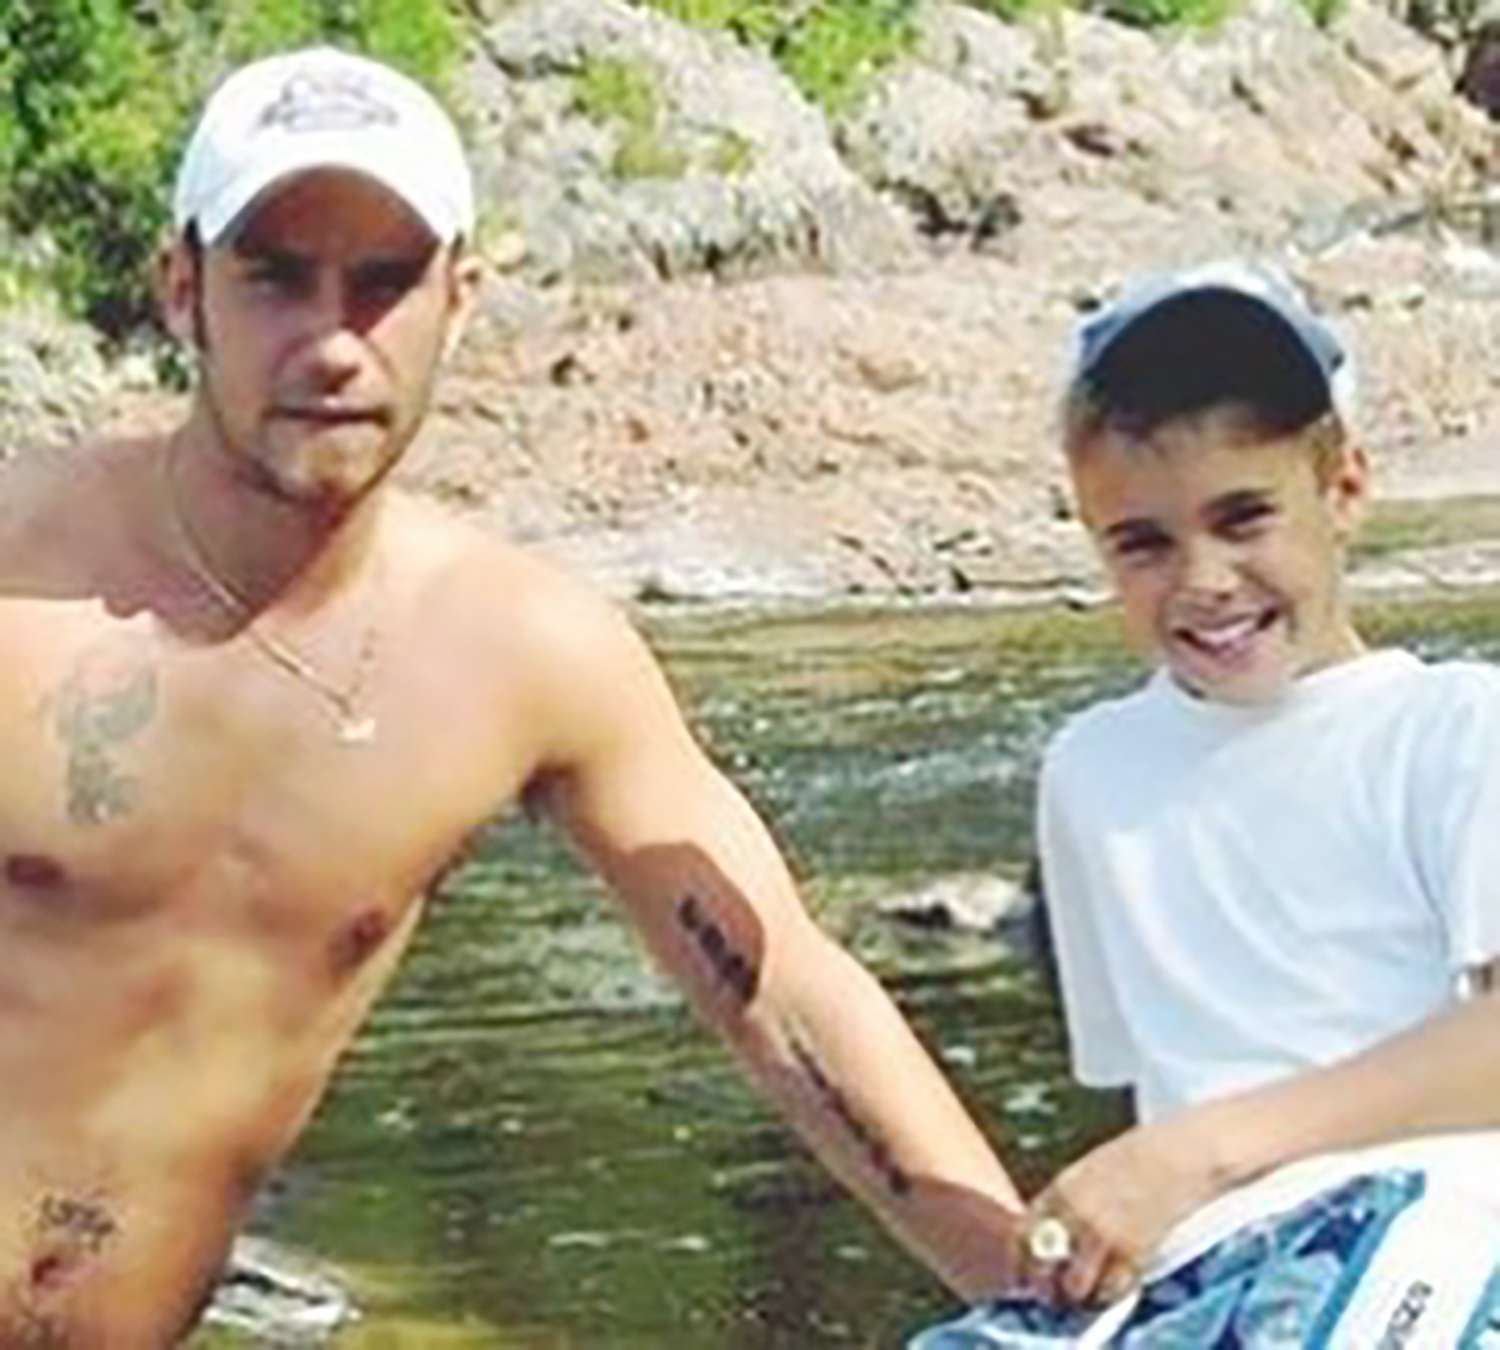 Justin Bieber Says 'There's So Much to Look Forward to' and 'Best Is Still Ahead' in Father's Day Post 